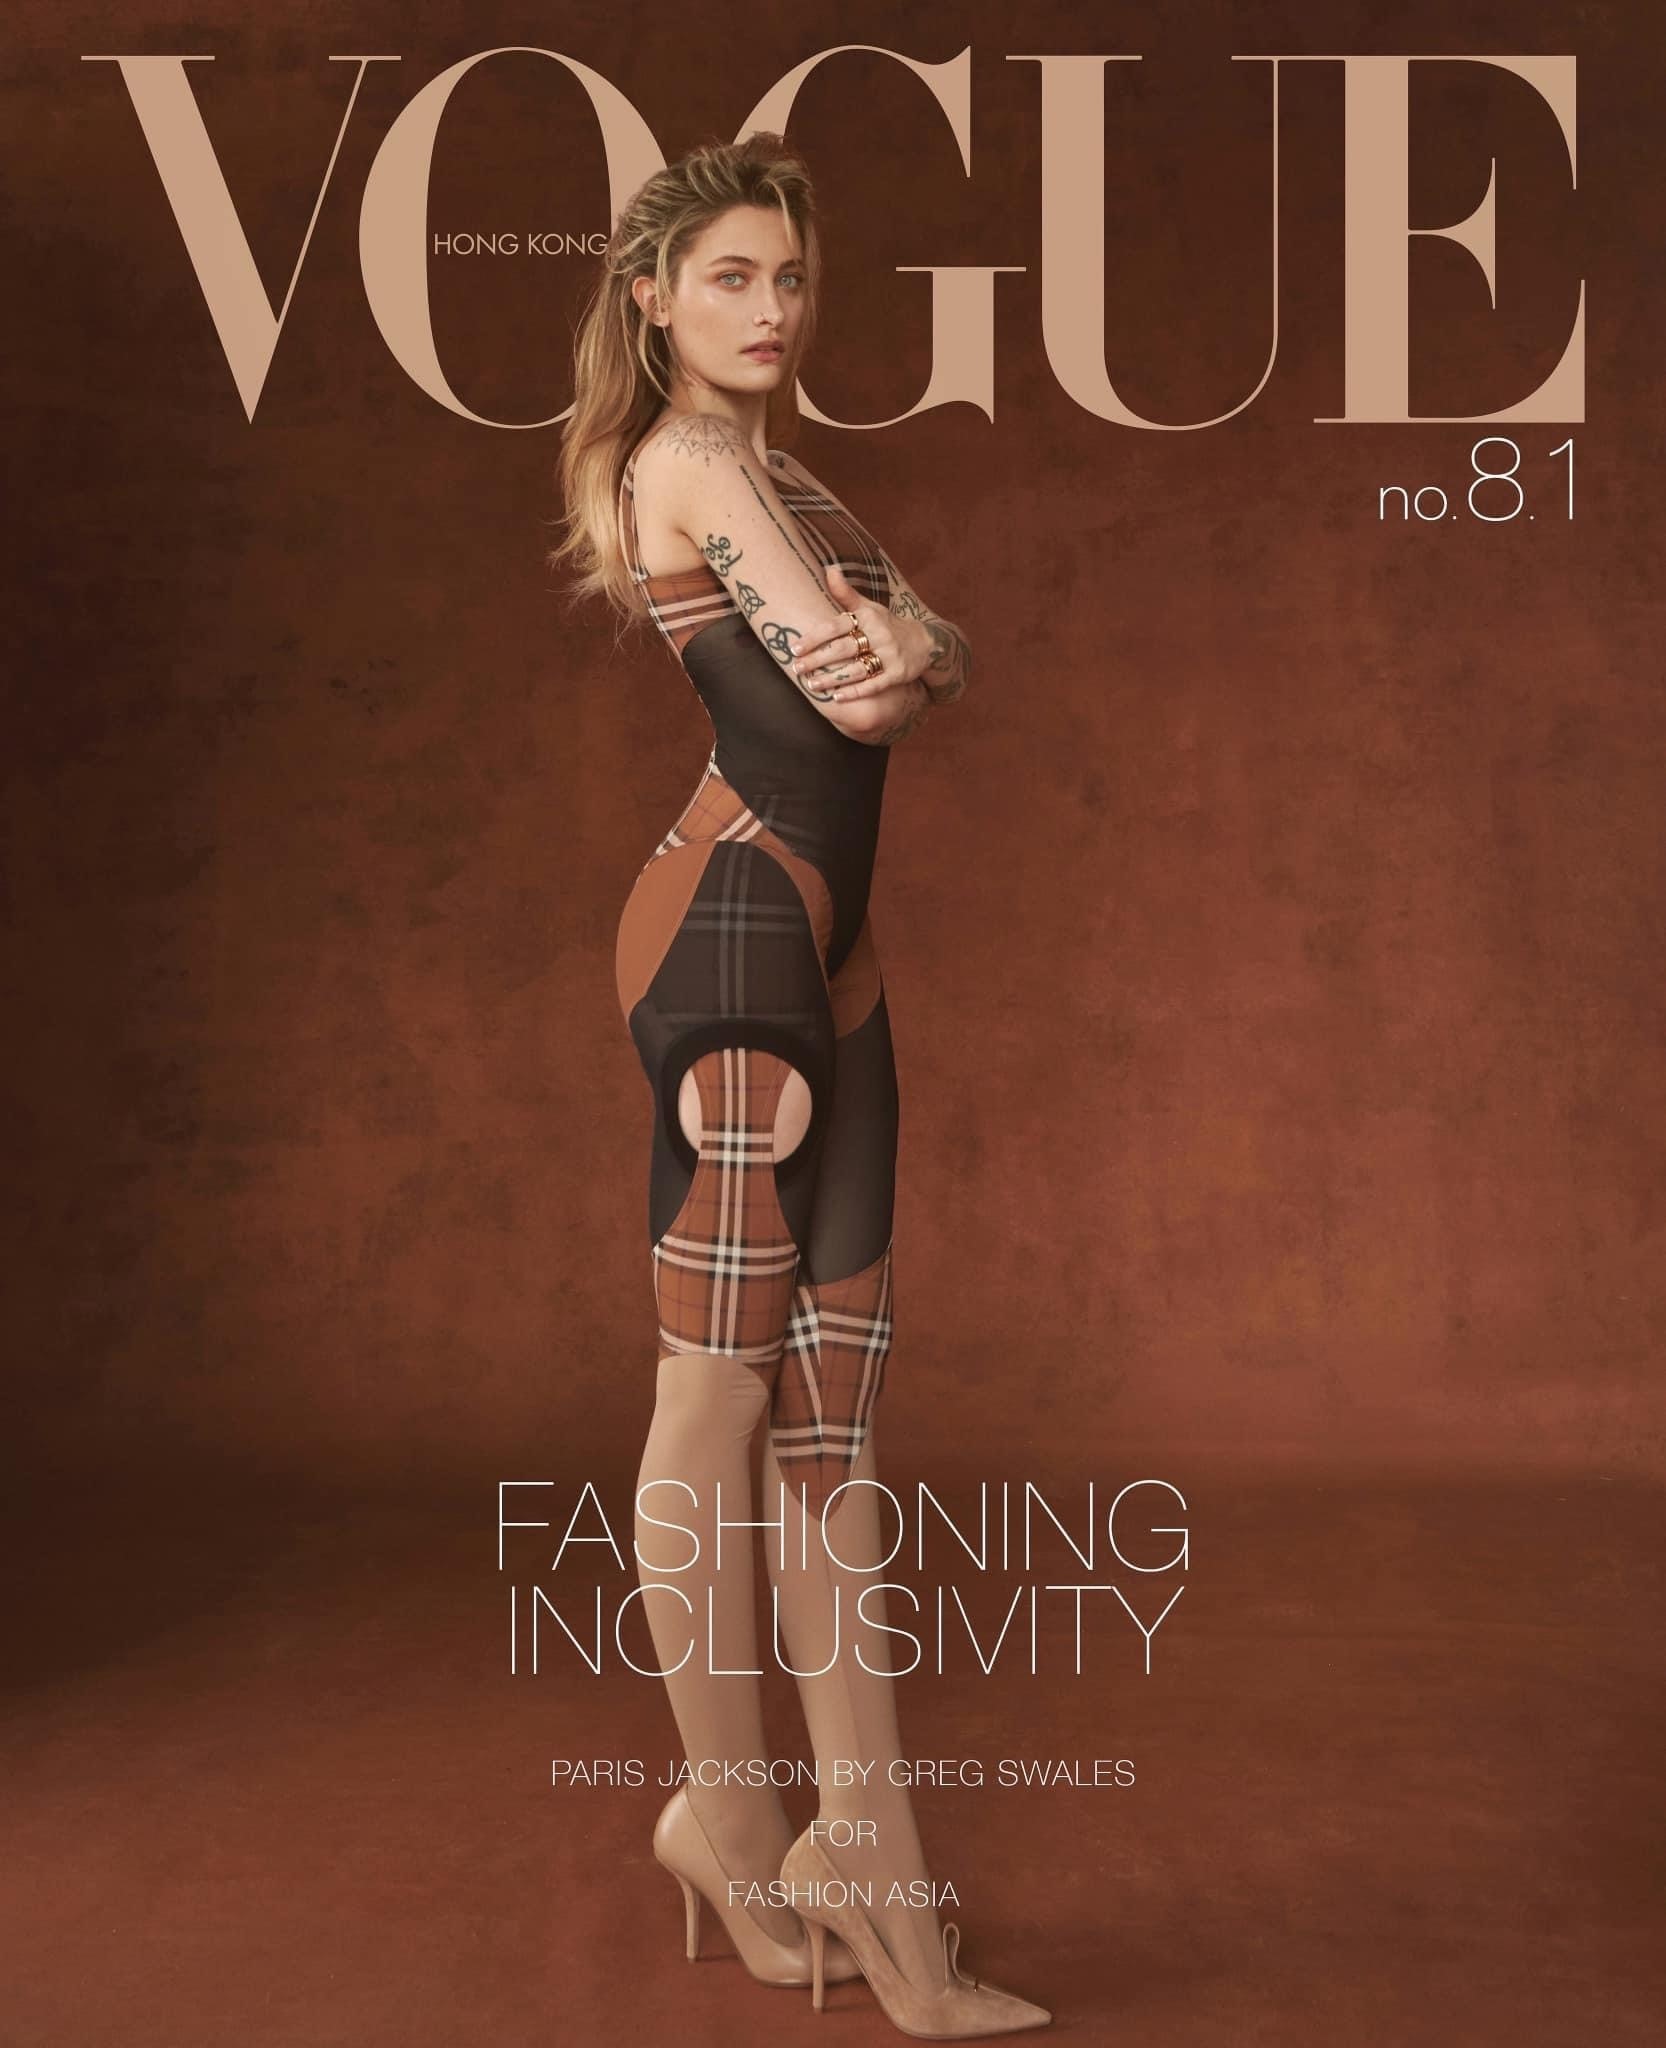 The Paris Jackson Vogue covered styled by Danyul Brown.